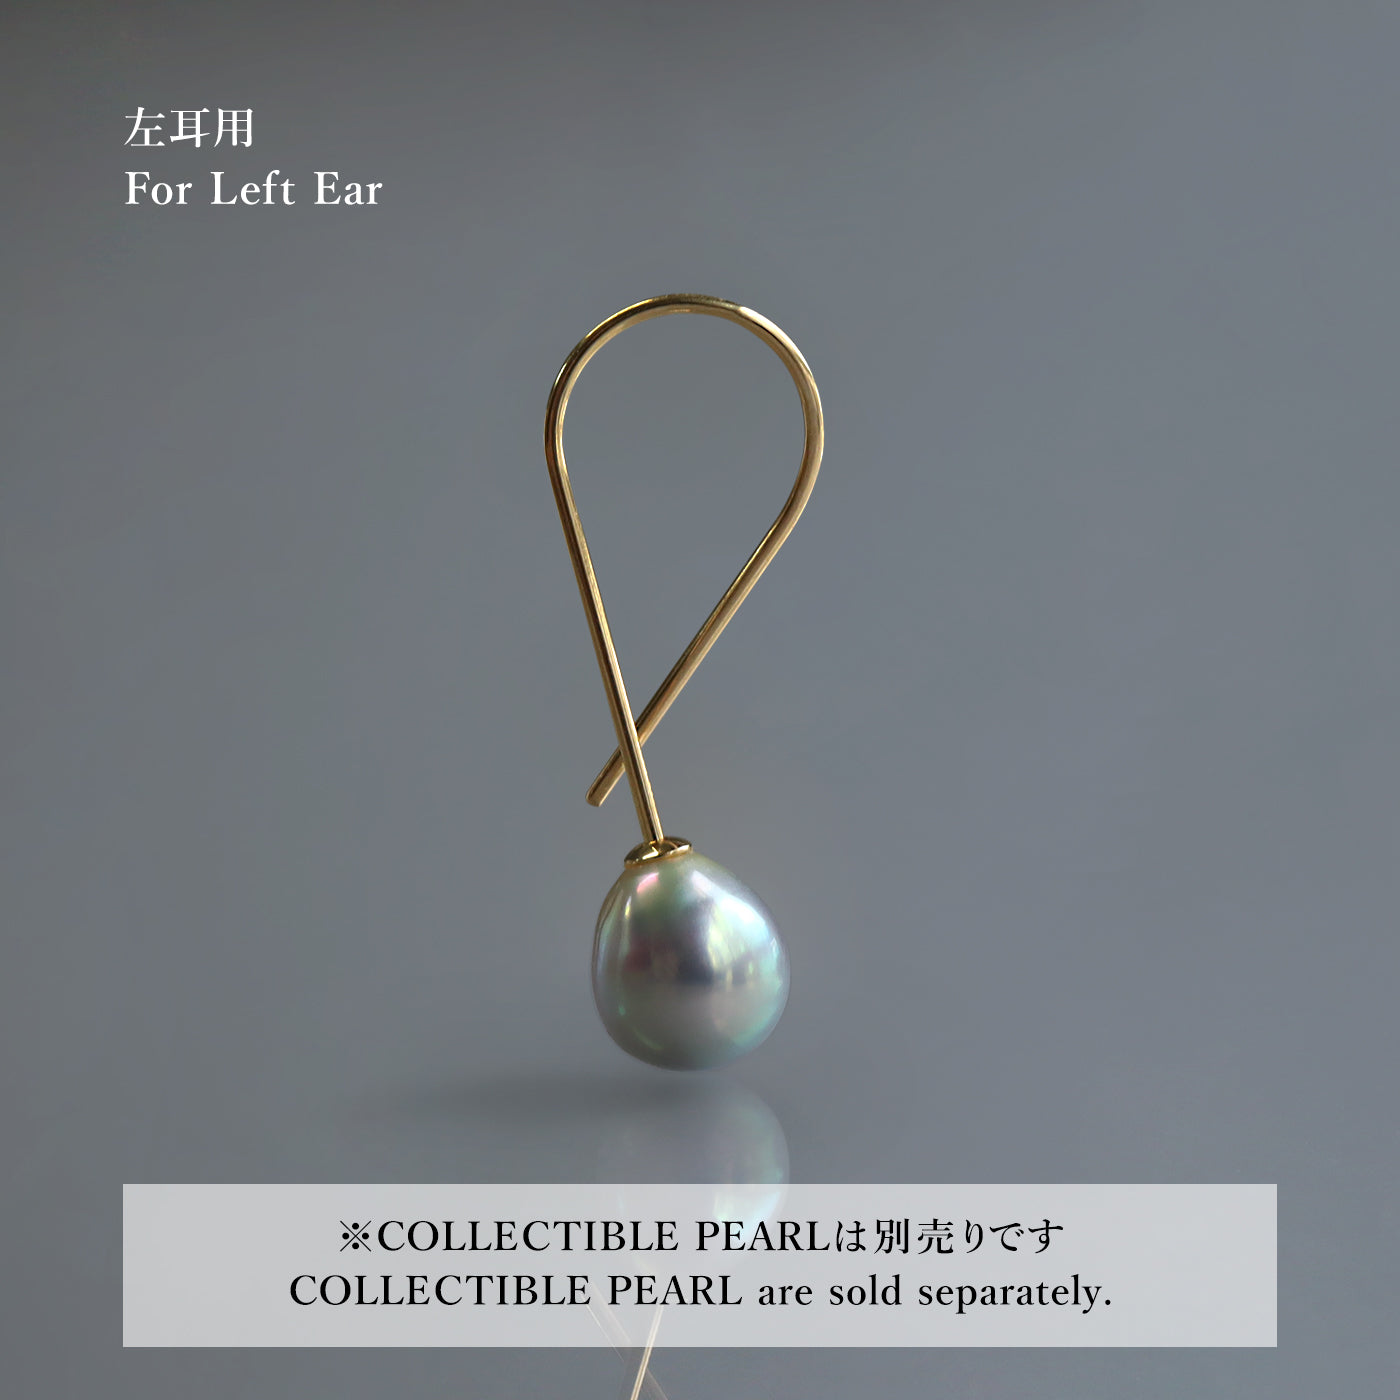 Born from rock　Pearl Wave earring 左耳用